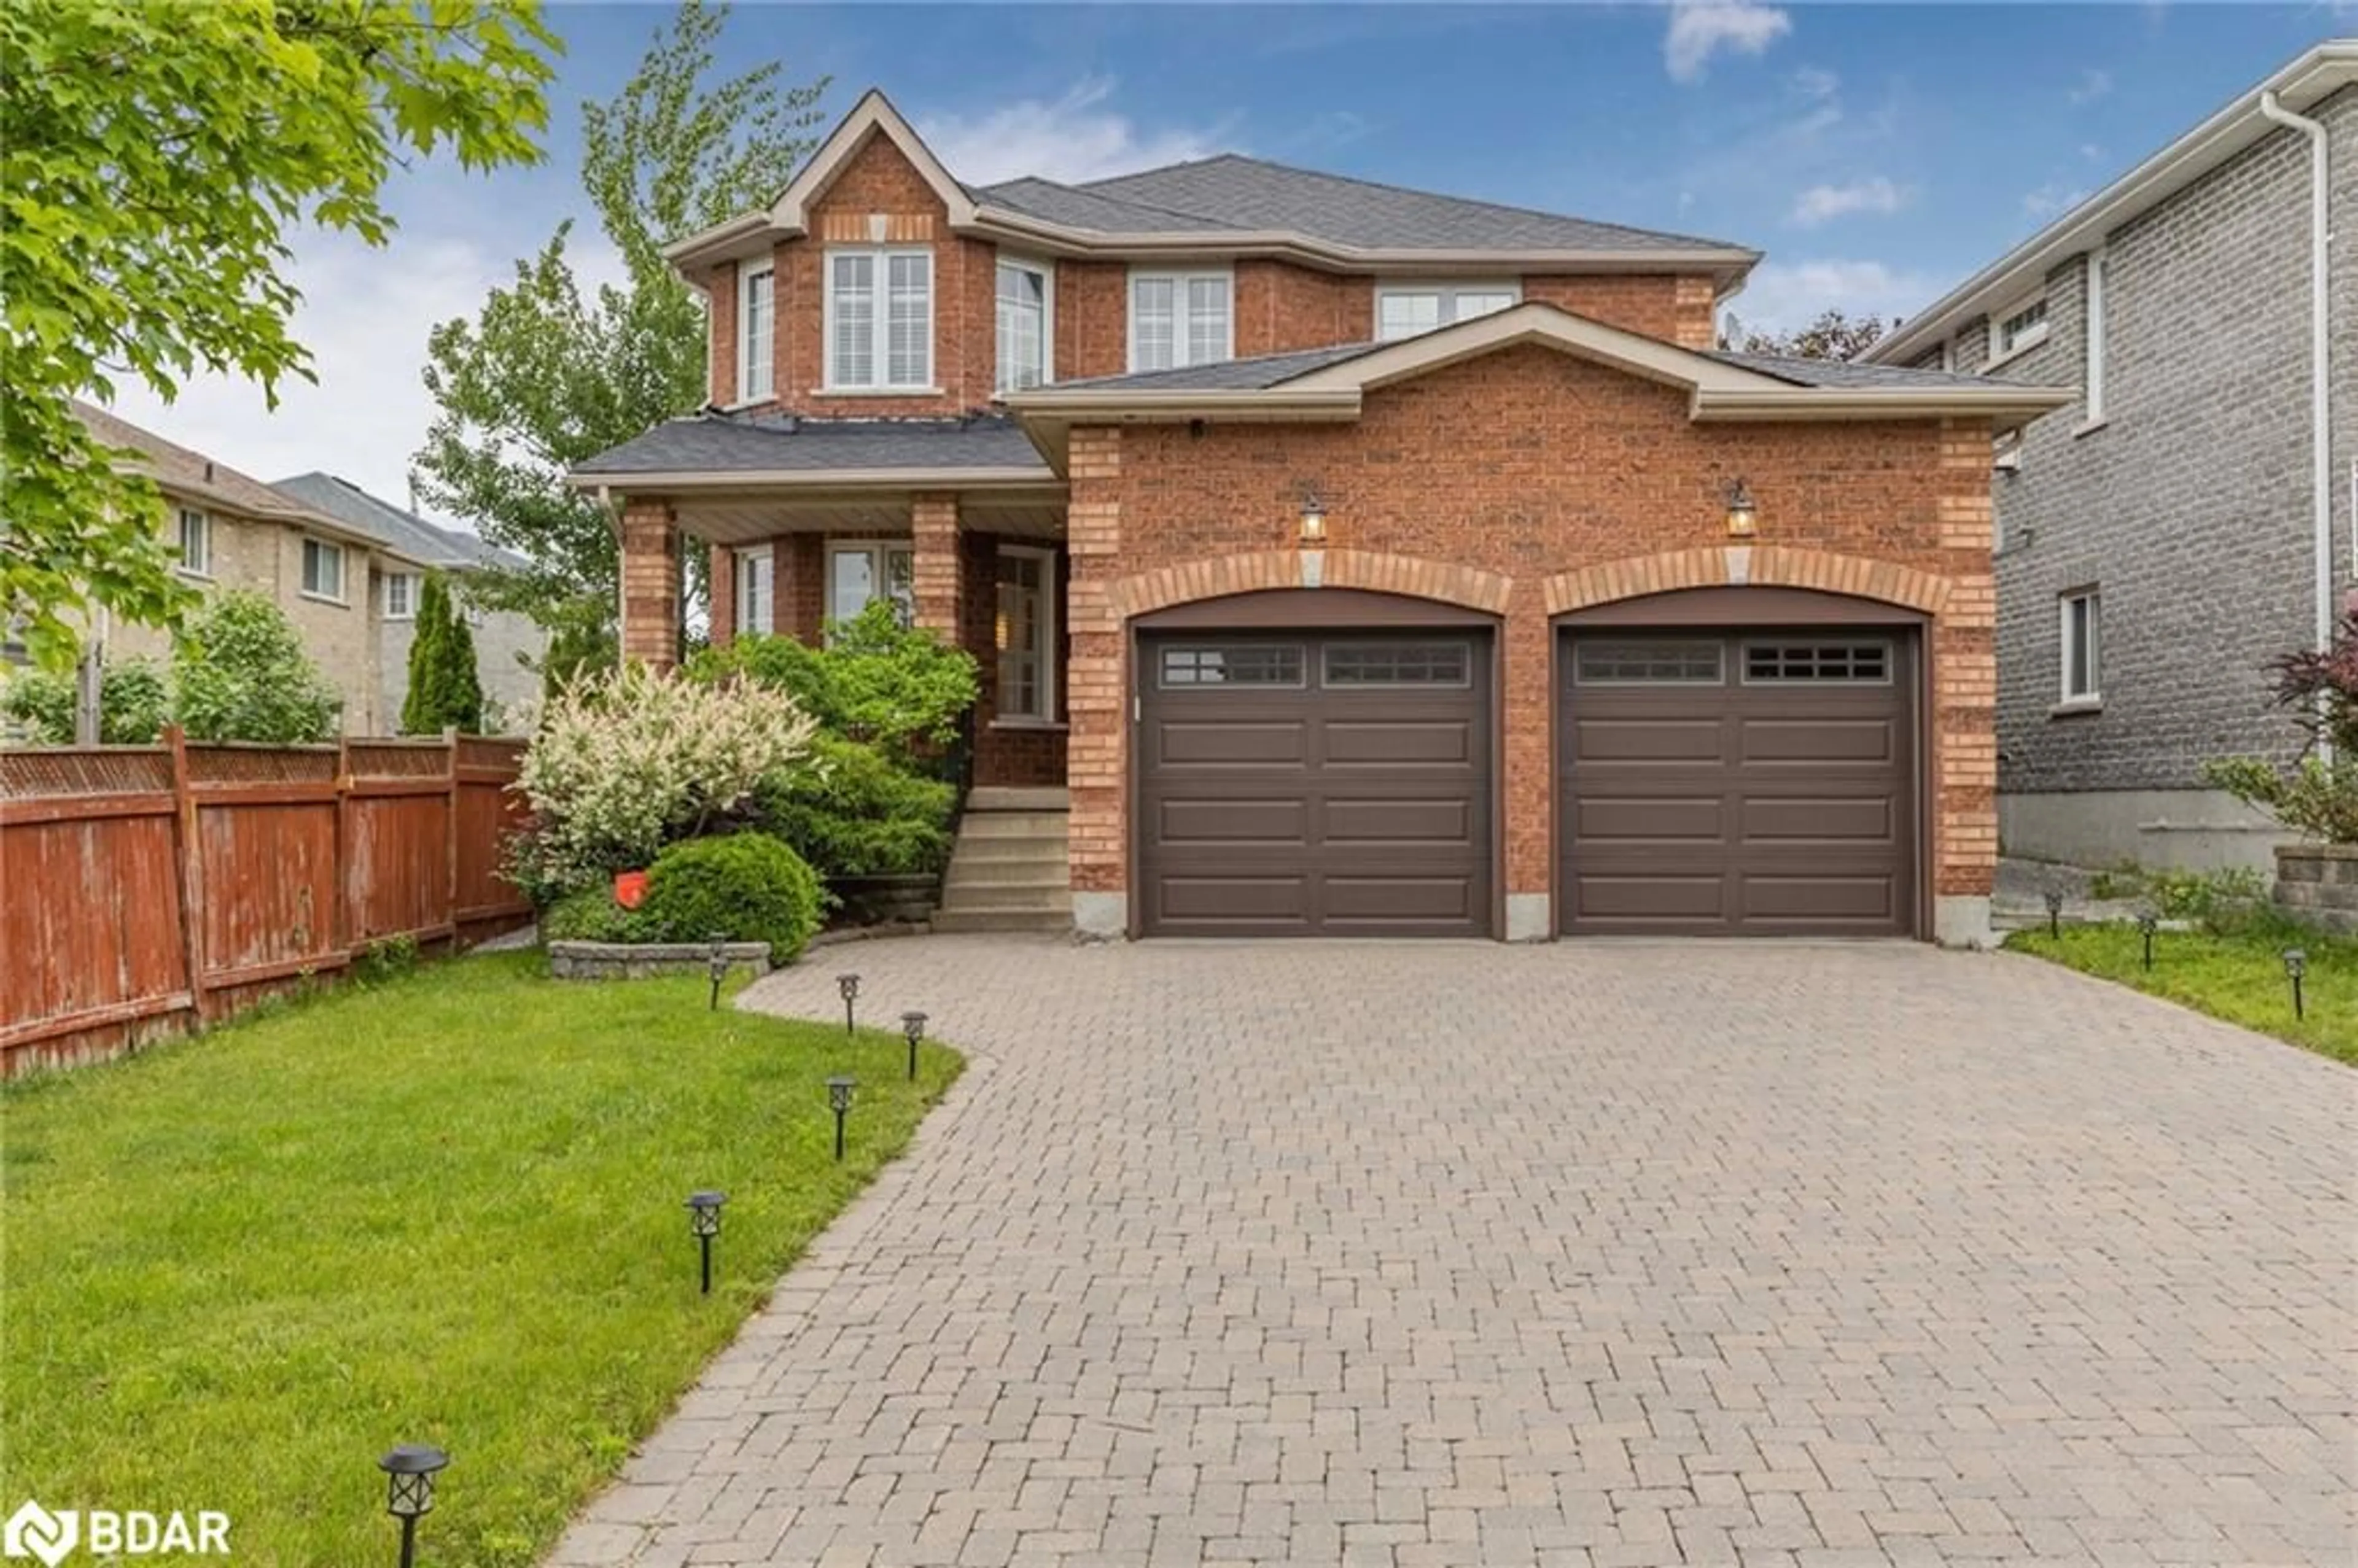 Home with brick exterior material for 21 Muir Dr, Barrie Ontario L4N 0J1